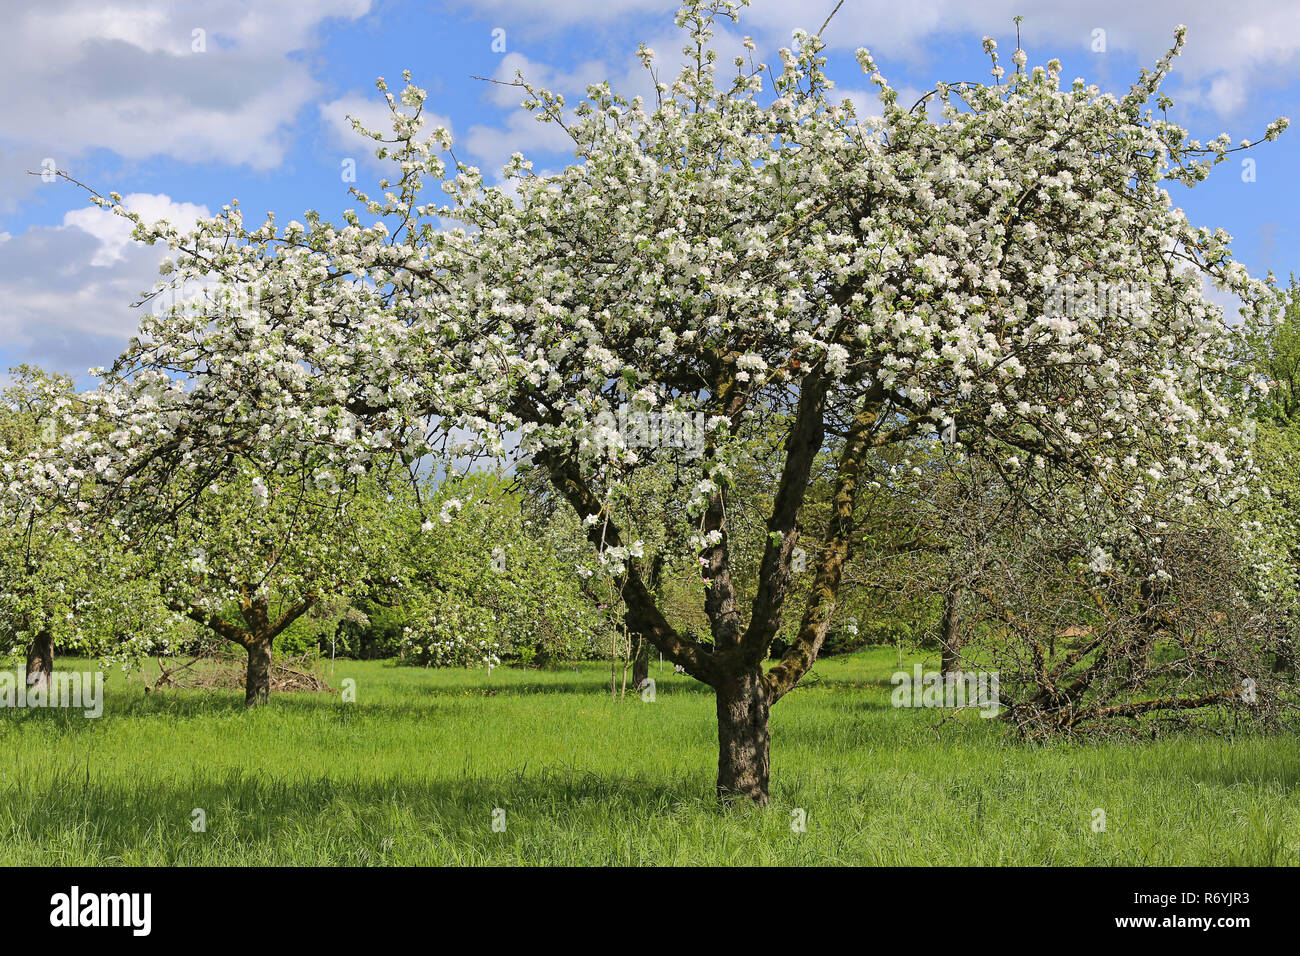 Blossoming apple tree sur orchard prairie Banque D'Images